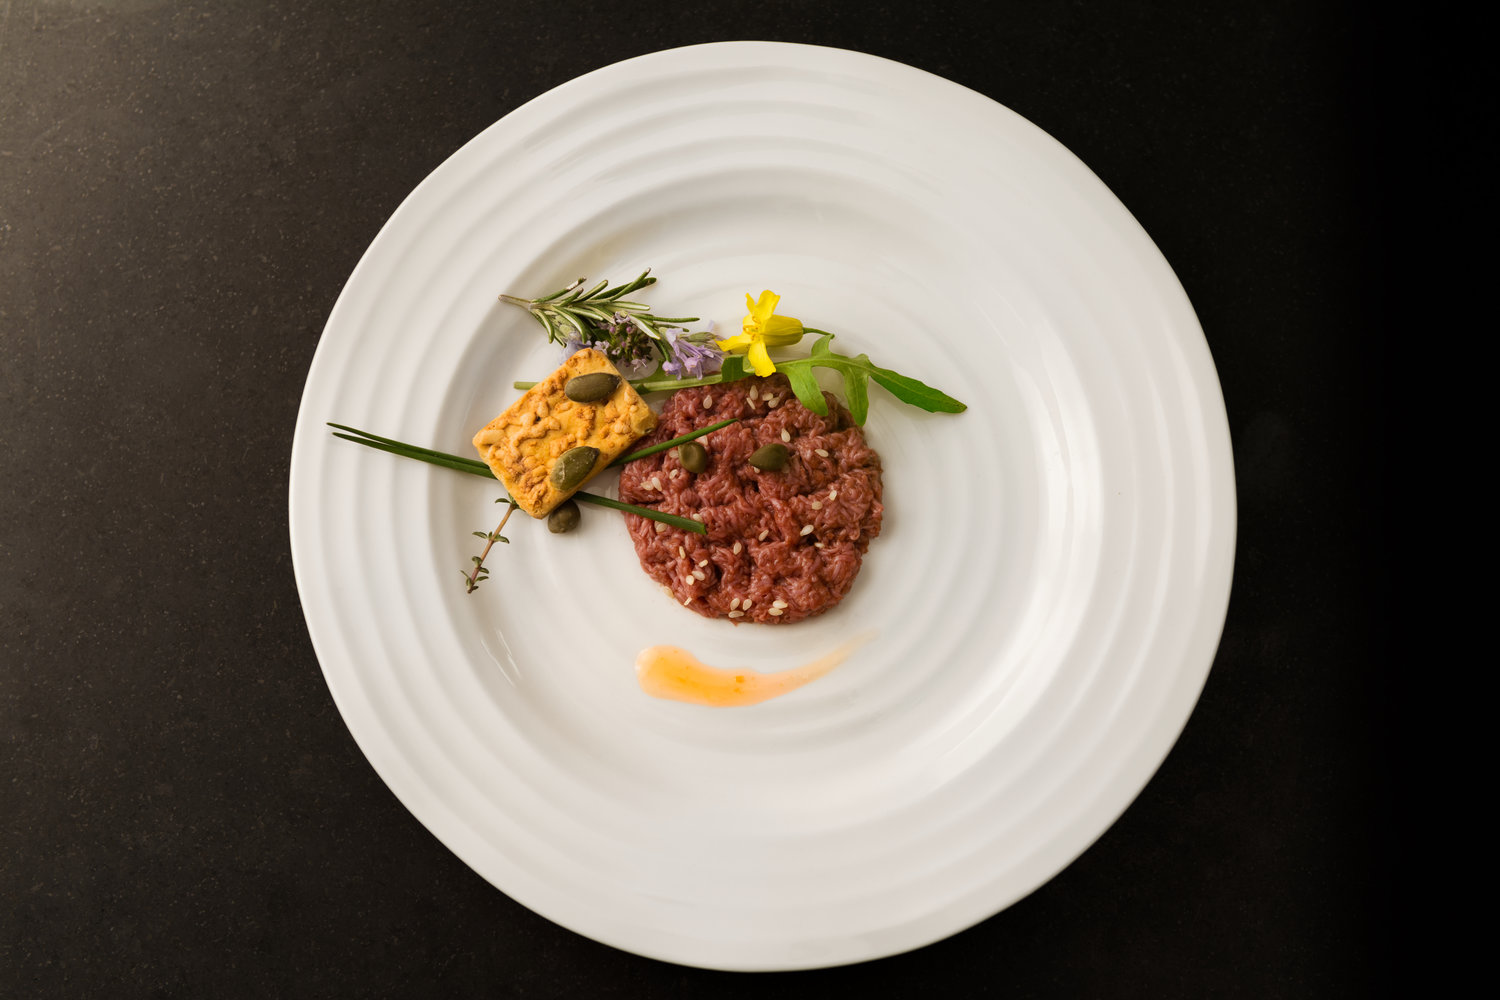 An artfully presented plate of cultured, raw ground beef garnished with greens and a cracker.